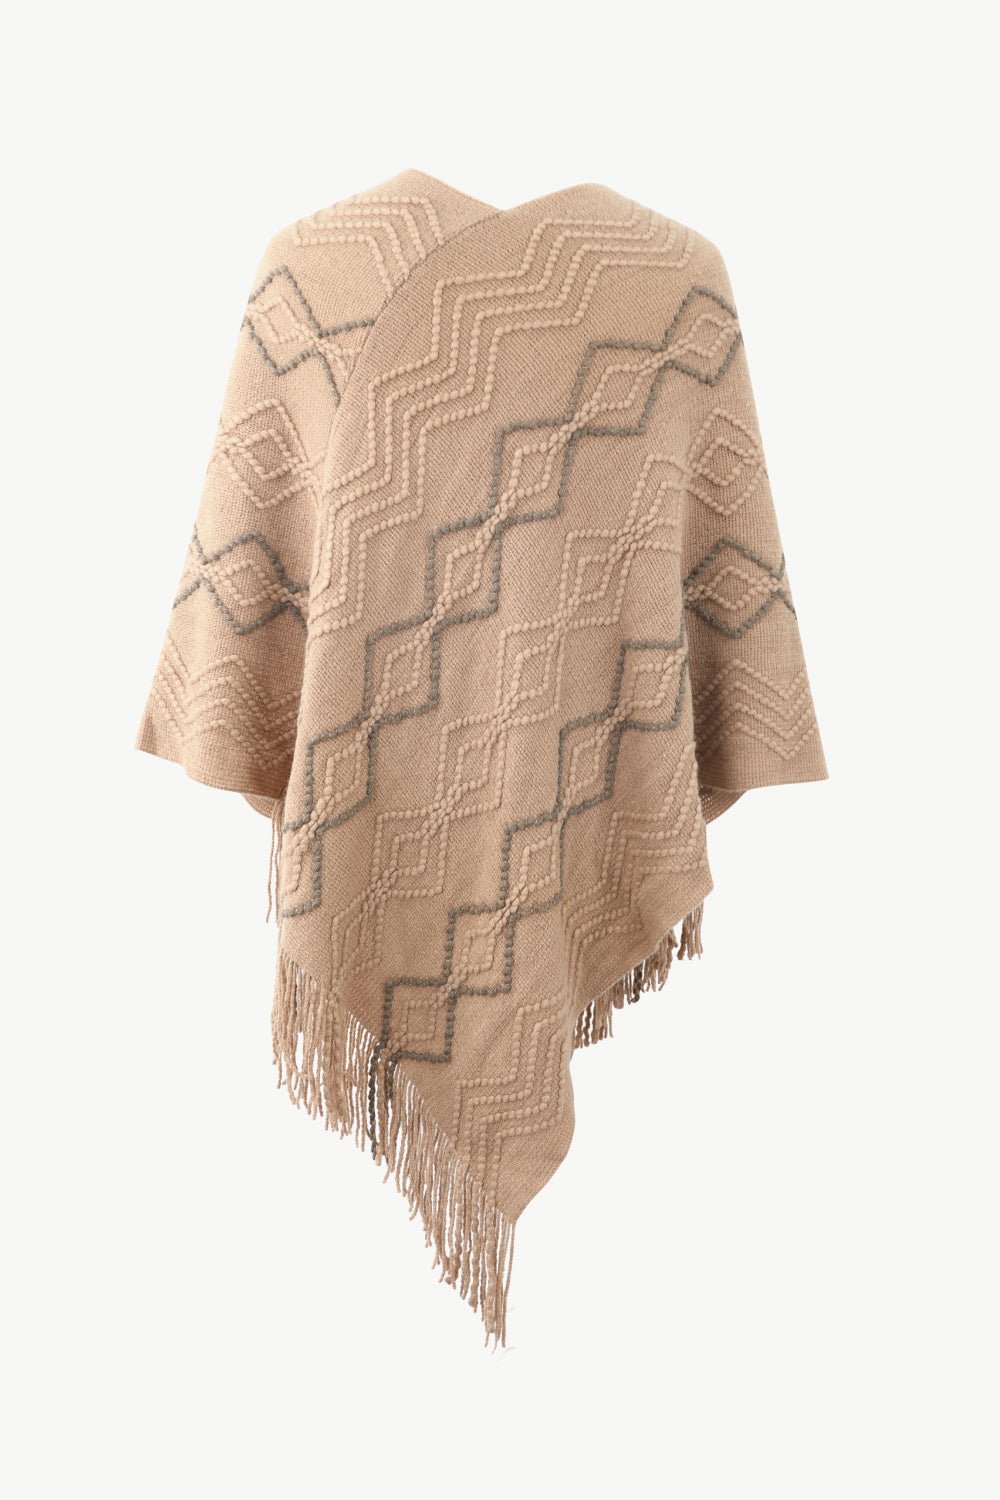 Back of Beige poncho with faux pearl and fringe trim